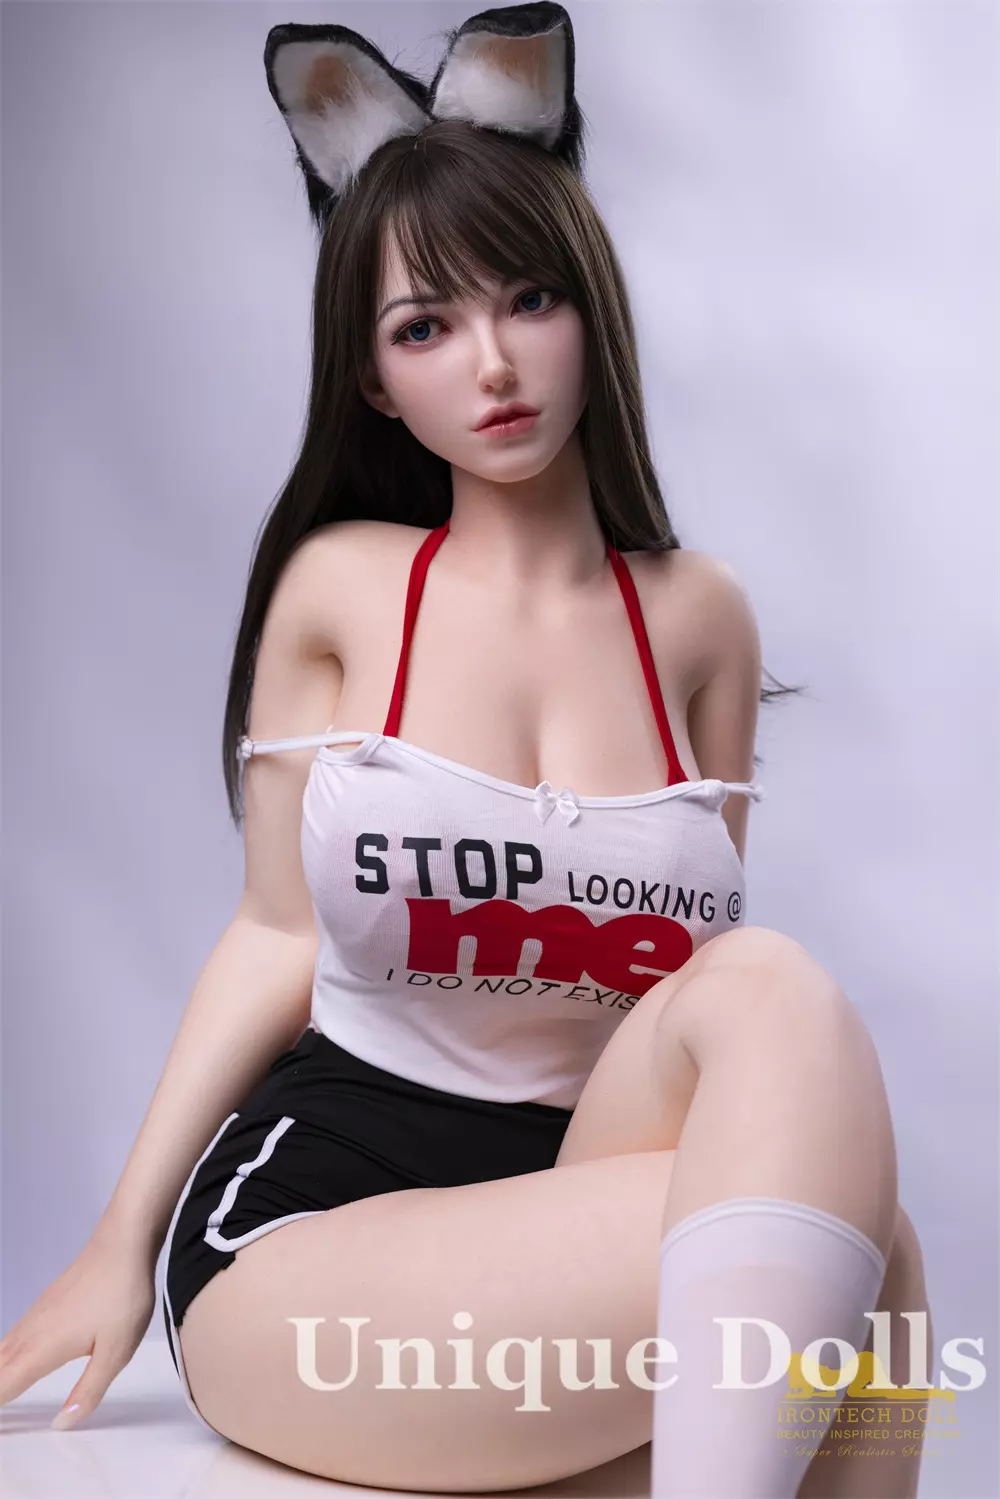 IRONTECH FULL SILICONE SEX DOLL - 165cm silicone doll S4 head